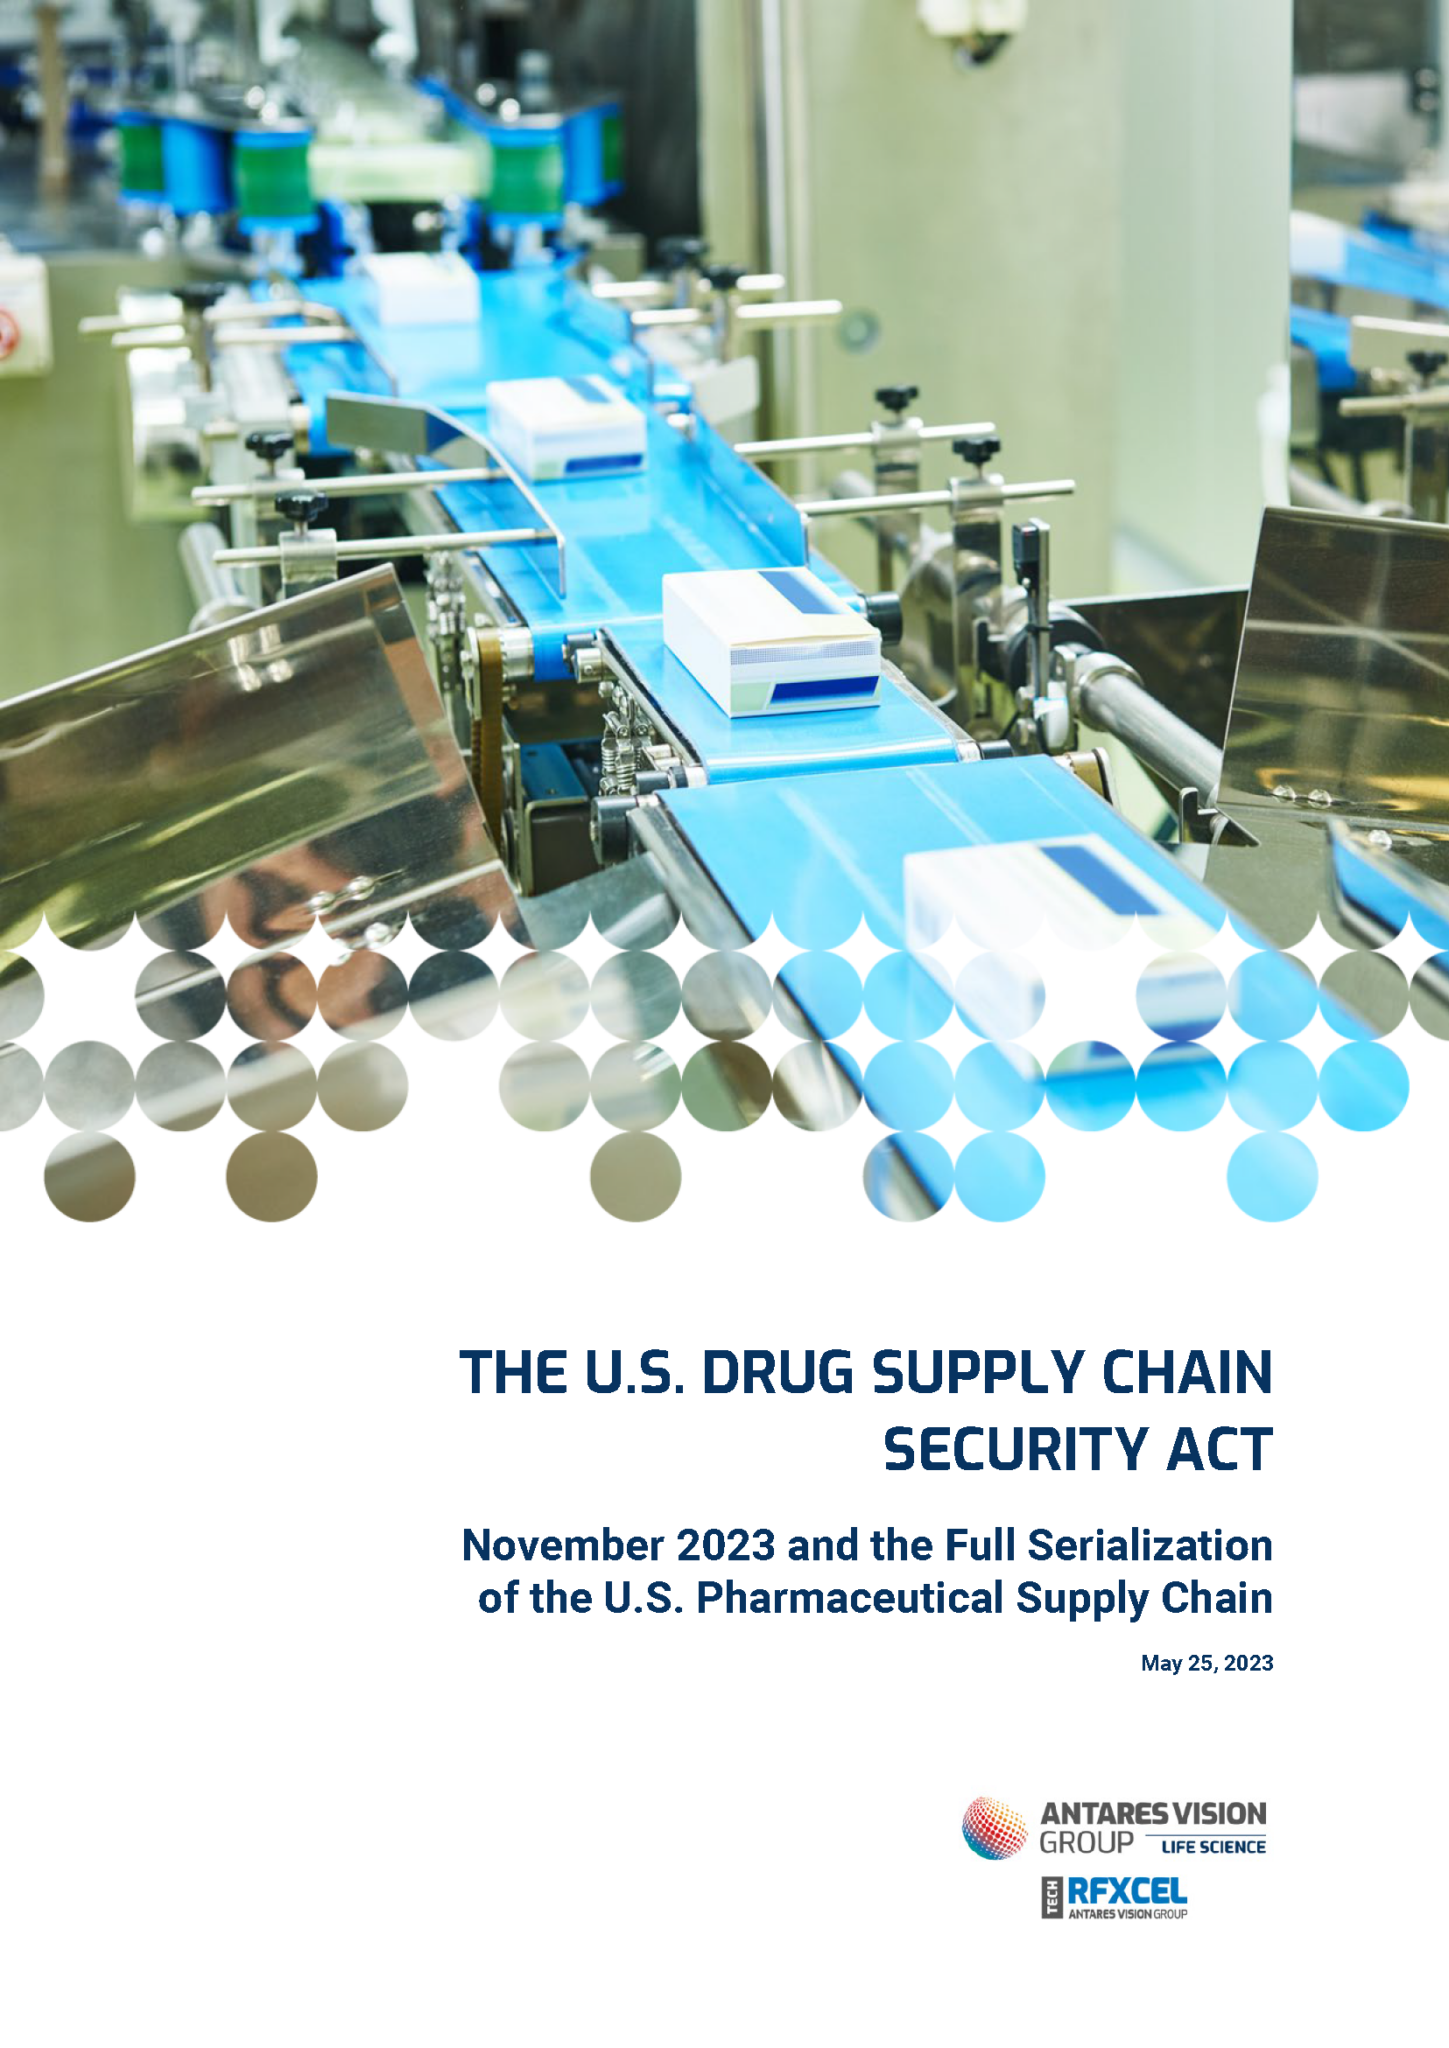 DSCSA: November 2023 and the Full Serialization of the U.S. Pharmaceutical Supply Chain